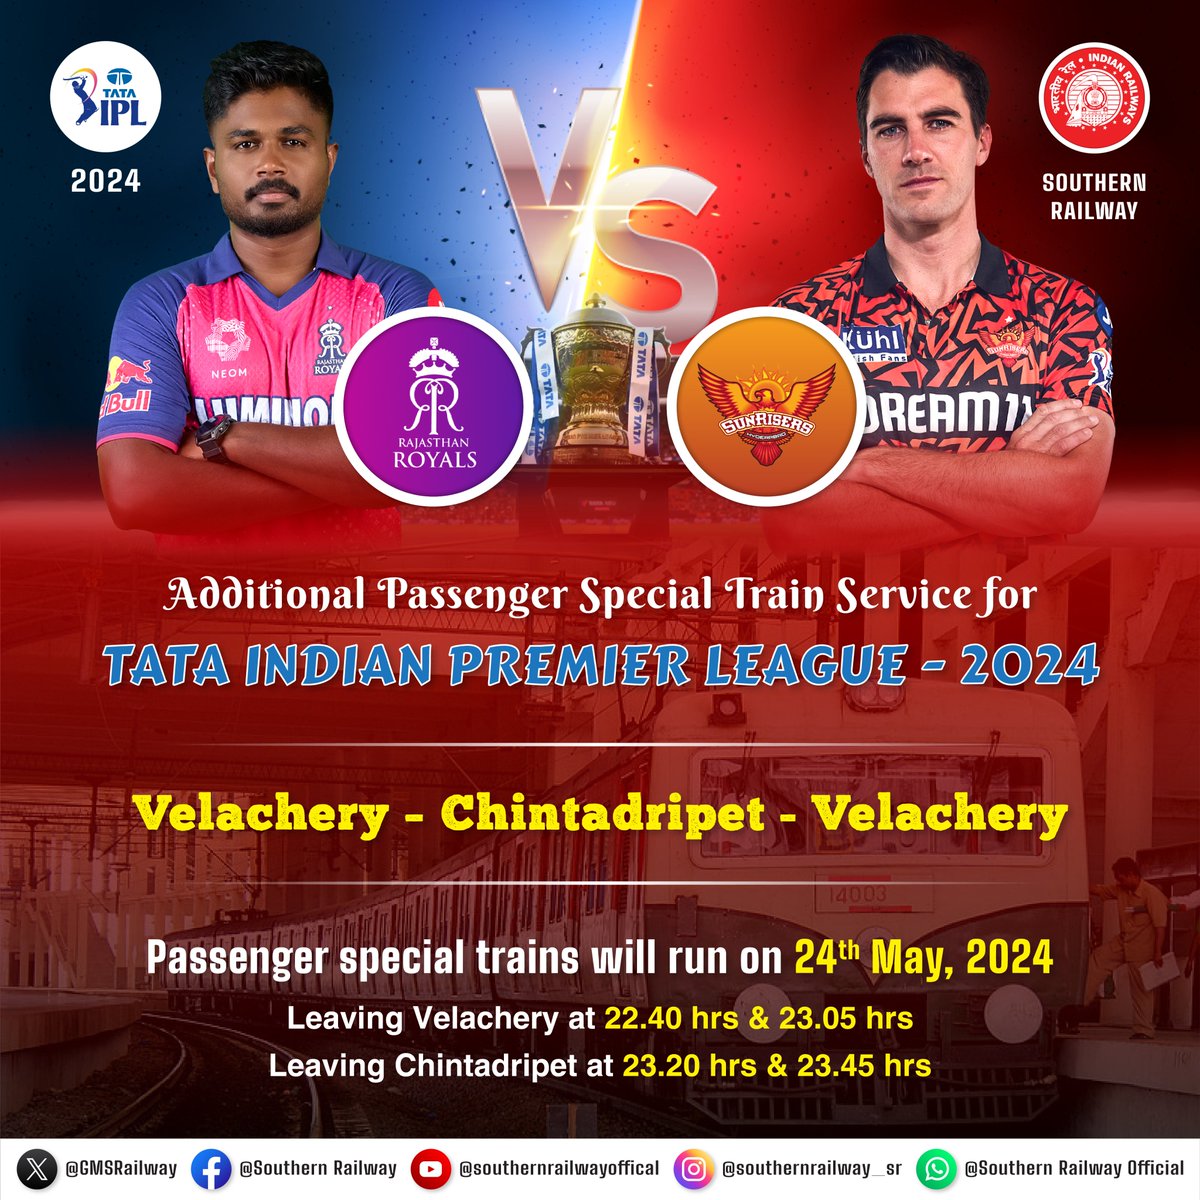 #SpecialTrain service for #TATAIPL fans! Now you can easily commute between #Velachery and #Chintadripet after the match on 24th May 2024. (Departs Velachery: 10.40 PM & 11.05 PM | Departs Chintadripet: 11.20 PM & 11.45 PM) #IPL2024 #Cricket #T20 #IPLUpdate